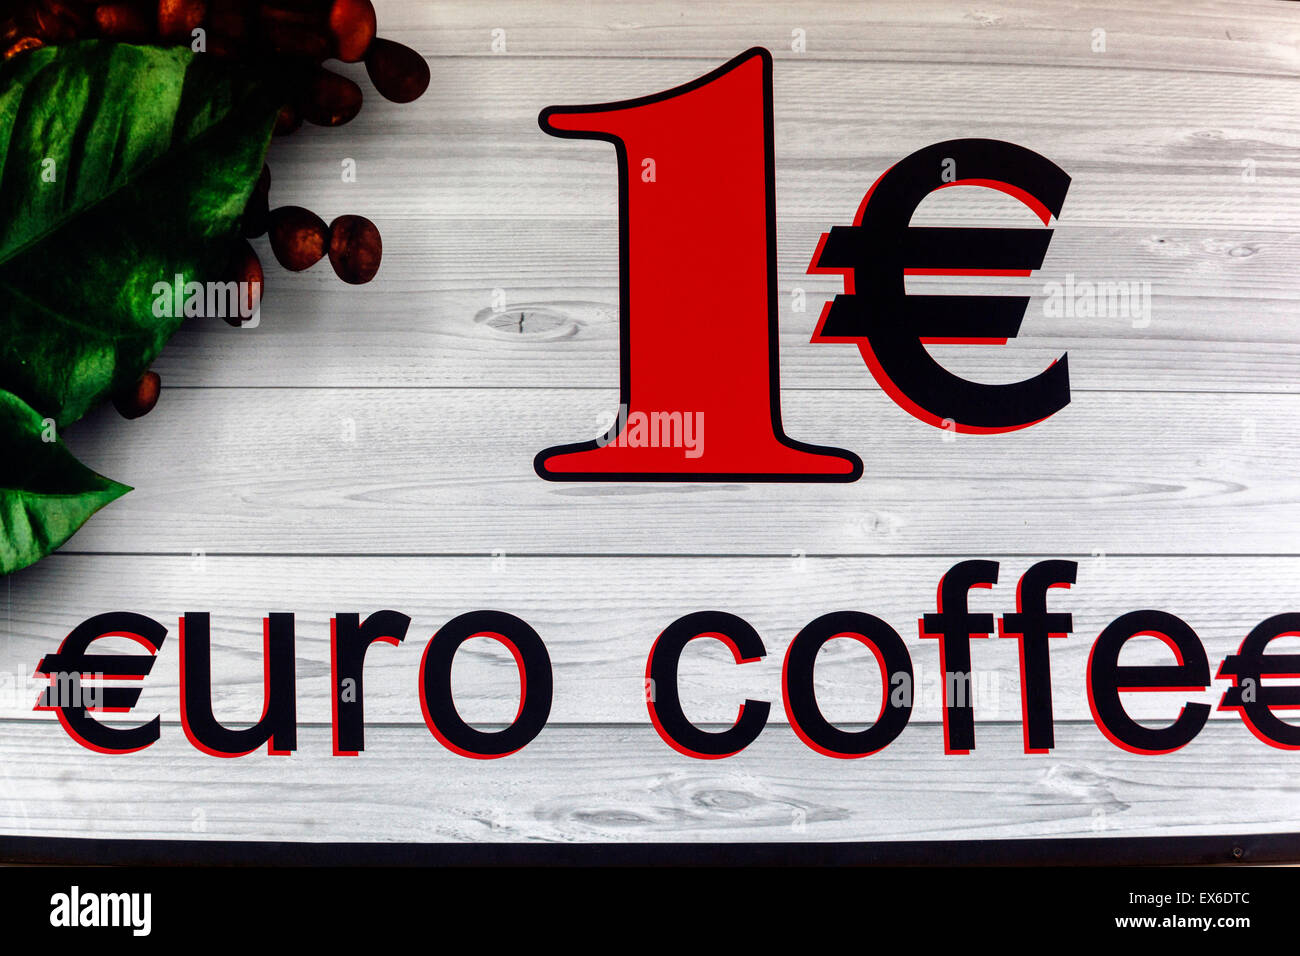 Coffee for one euro, sign ad advert Stock Photo - Alamy